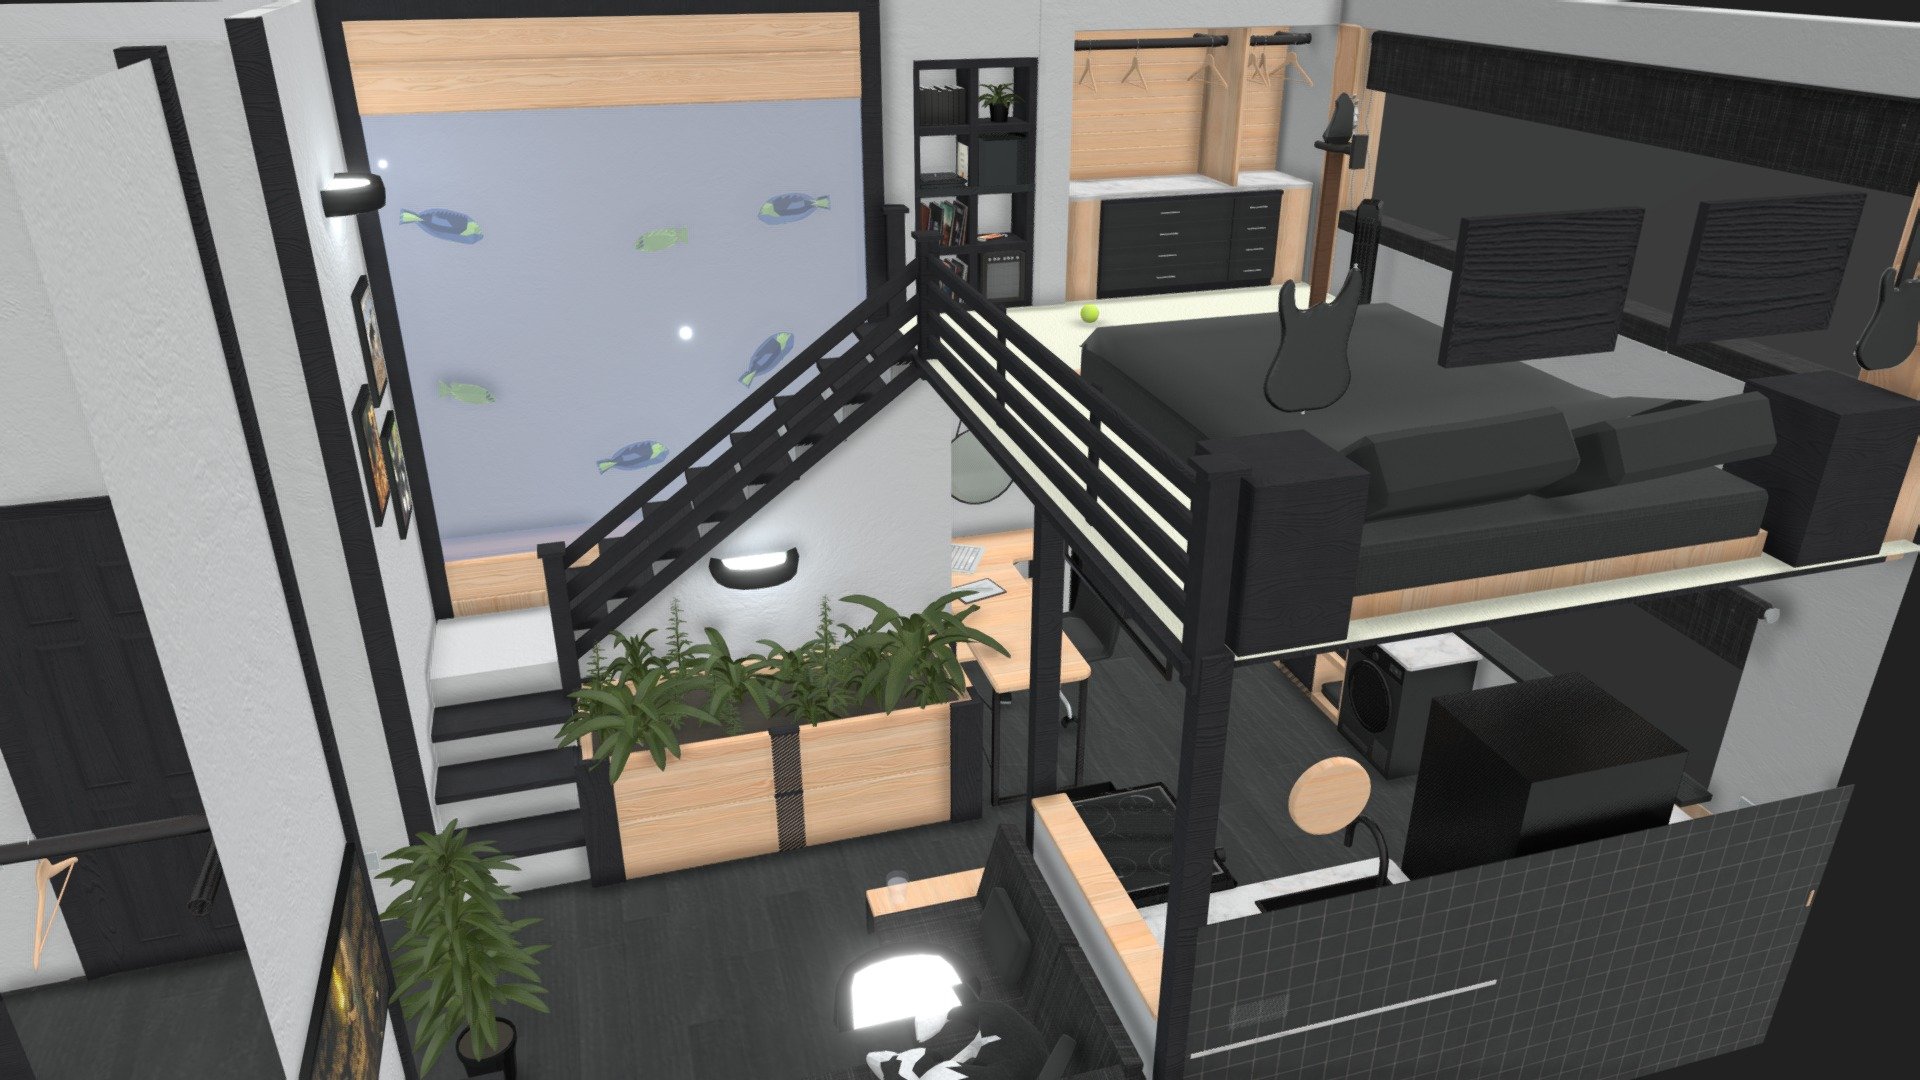 My dream apartment/home modelled in Maya 2022 for my Final Major Project in my first year of a Games Art college course. 

Any feedback (positive or negative) is greatly appreciated as it will really help with my evaluation next week.

title aided by @strawbie133 - Modern Living Space - Final Major Project - Buy Royalty Free 3D model by sam (@pigeons) 3d model